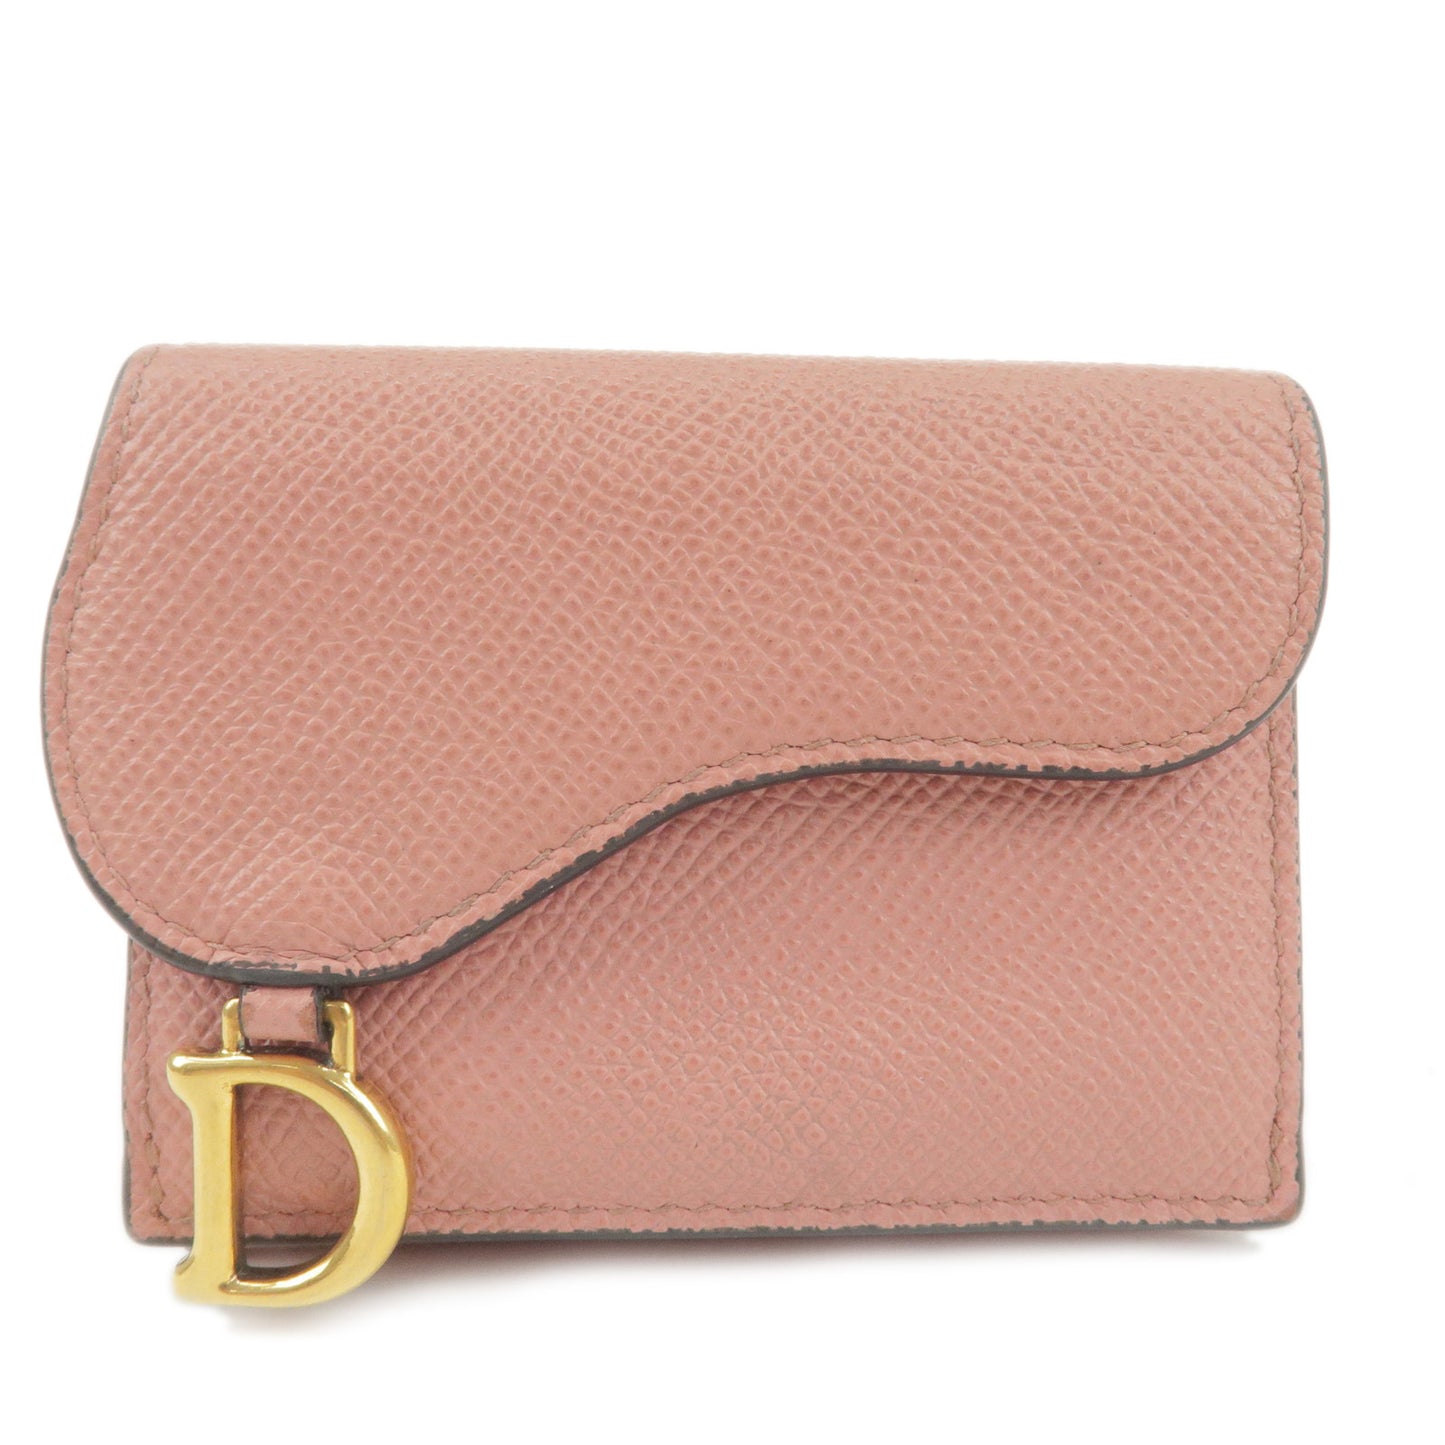 Christian-Dior-Leather-Saddle-Compact-Trifold-Wallet-Pink	